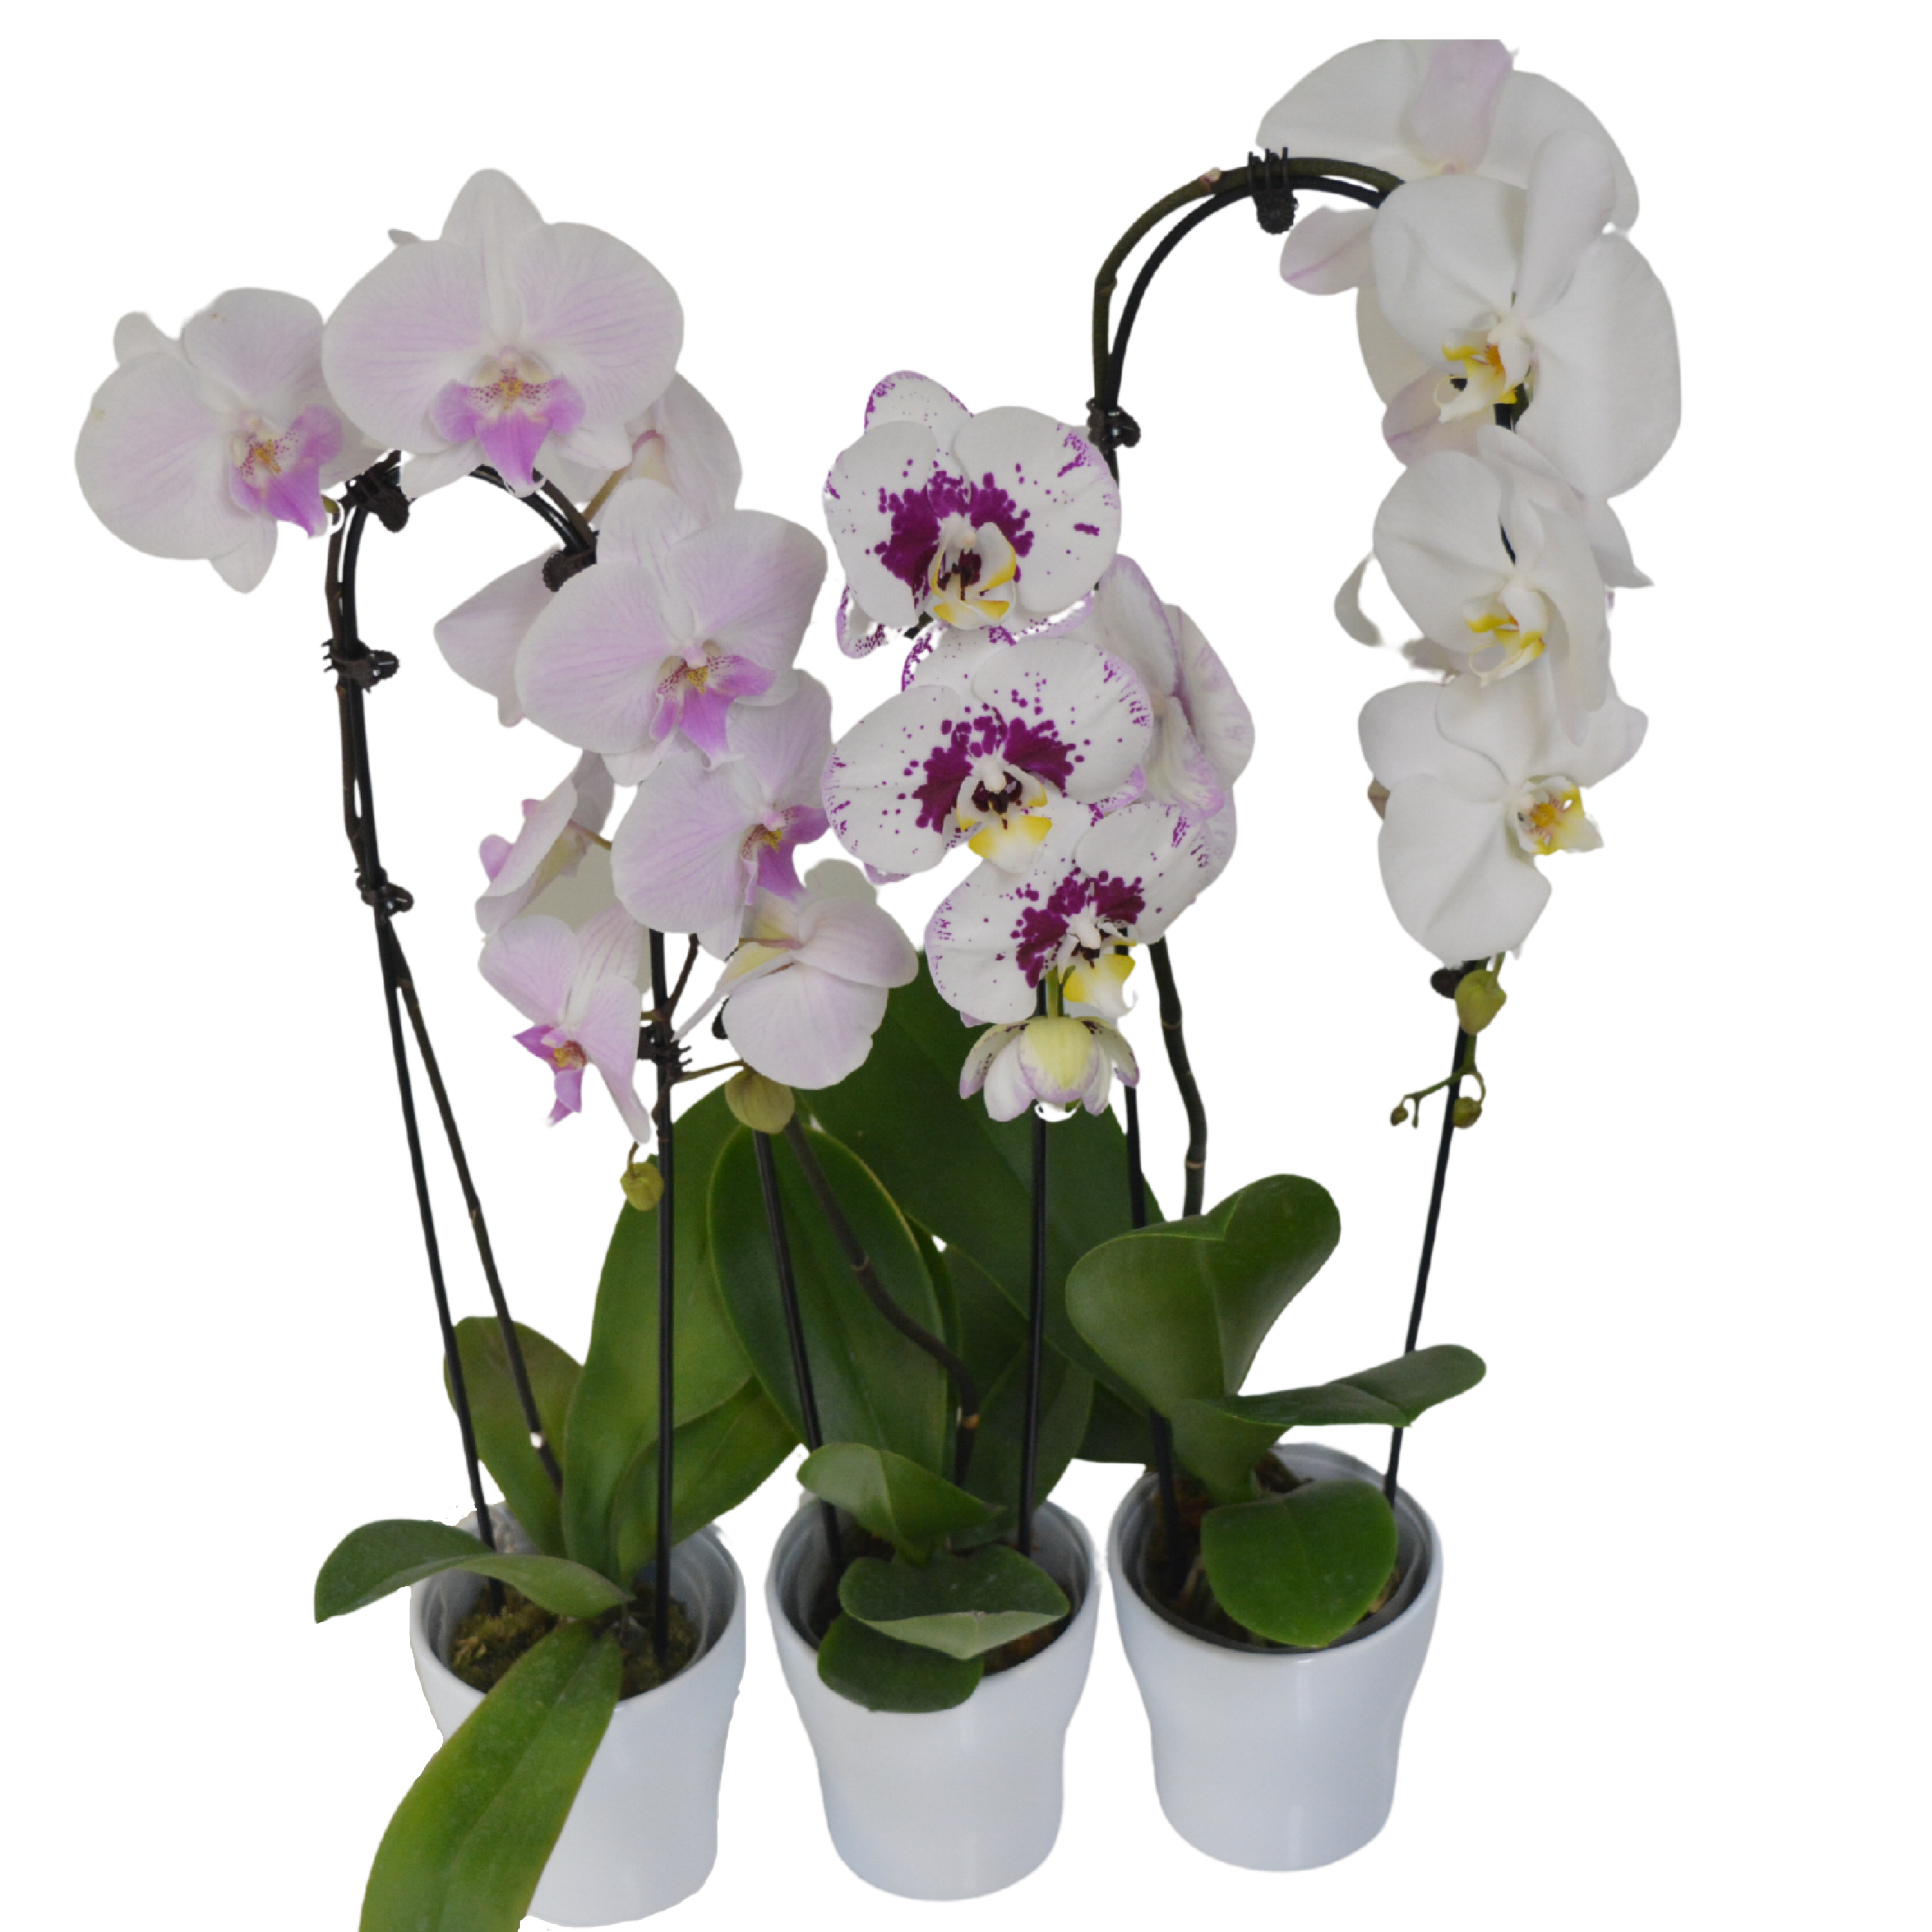 5" Cascading Single Spike Orchid Bare Pot